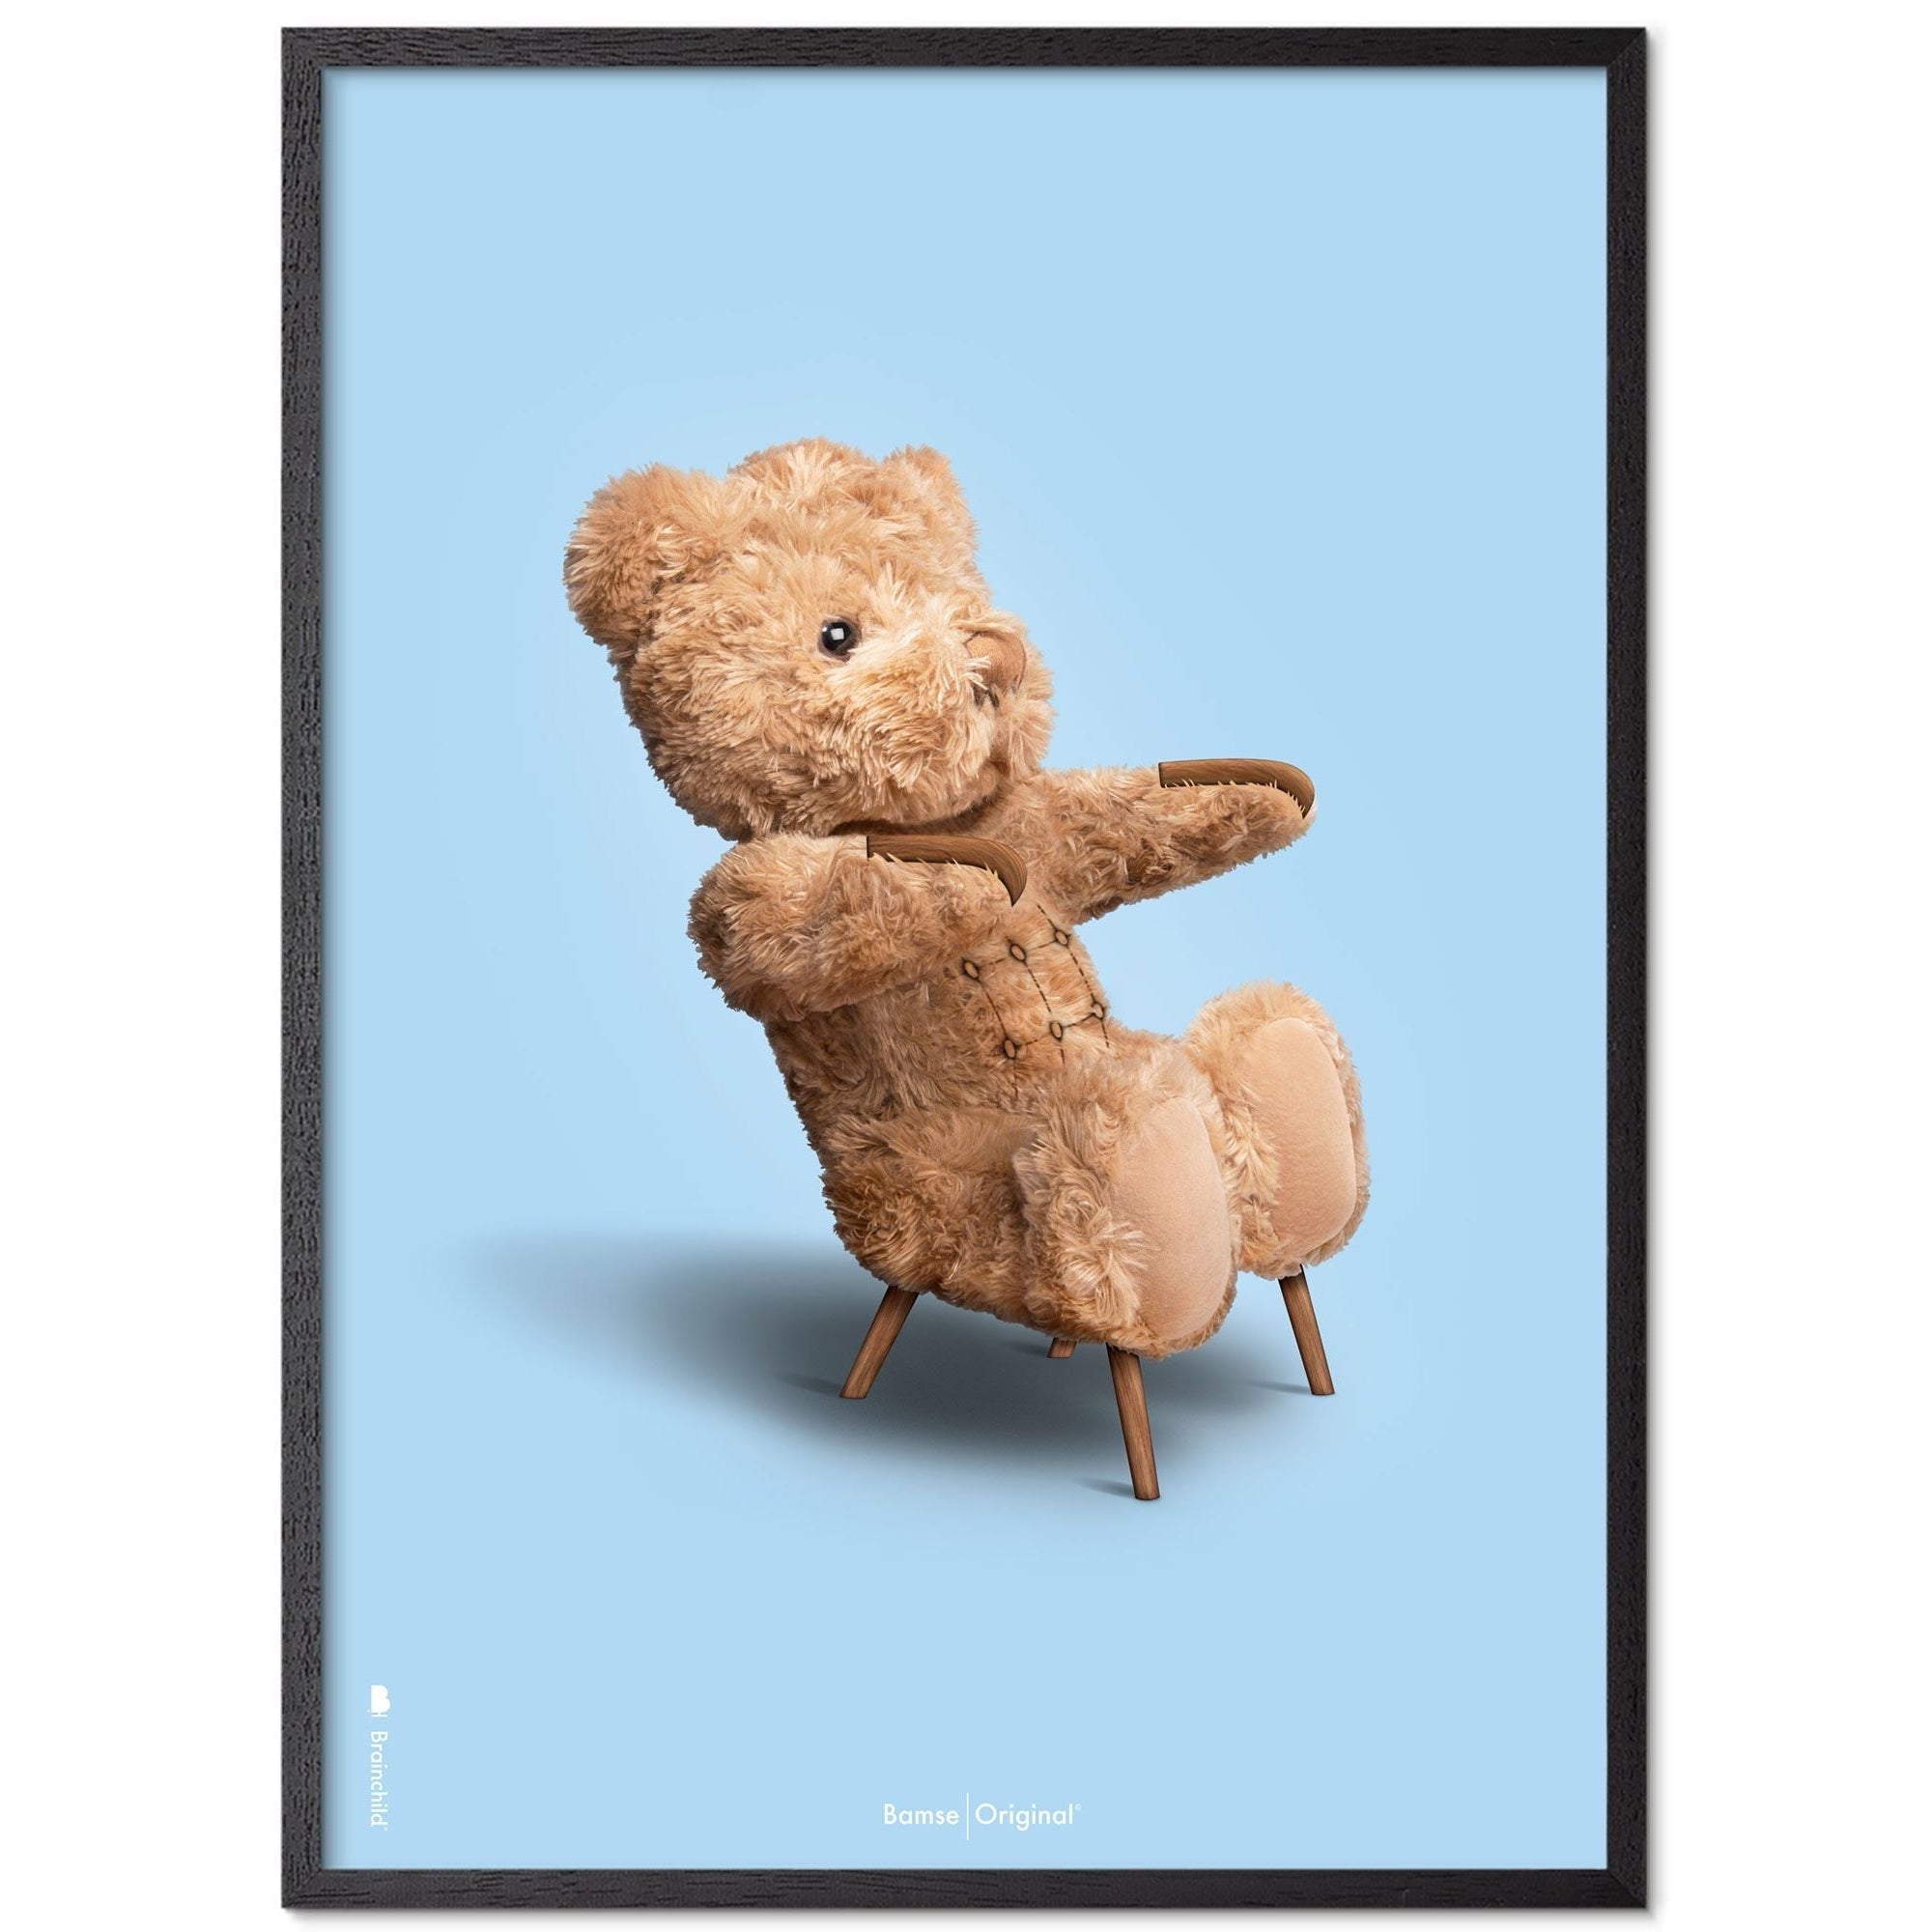 Brainchild Teddy Bear Classic Poster Frame Made Of Black Lacquered Wood 70x100 Cm, Light Blue Background